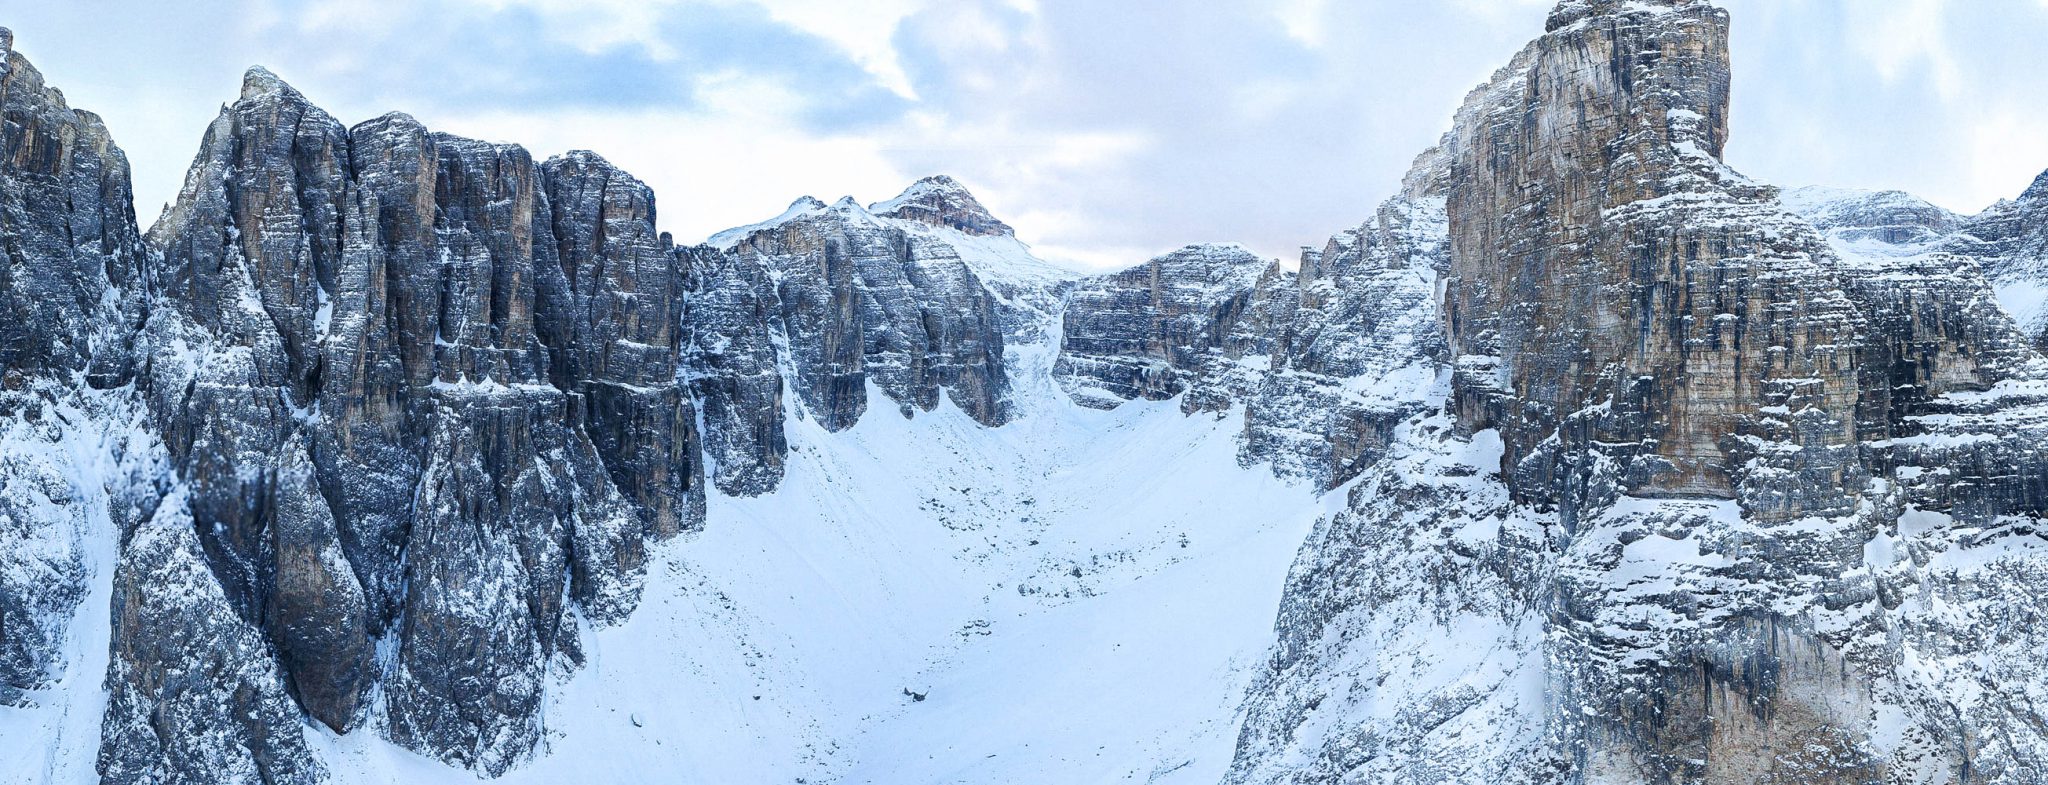 Image of a snowy valley with steep, rocky cliffs on either side, taken from a helicopter during an aerial 3D scan of the environment